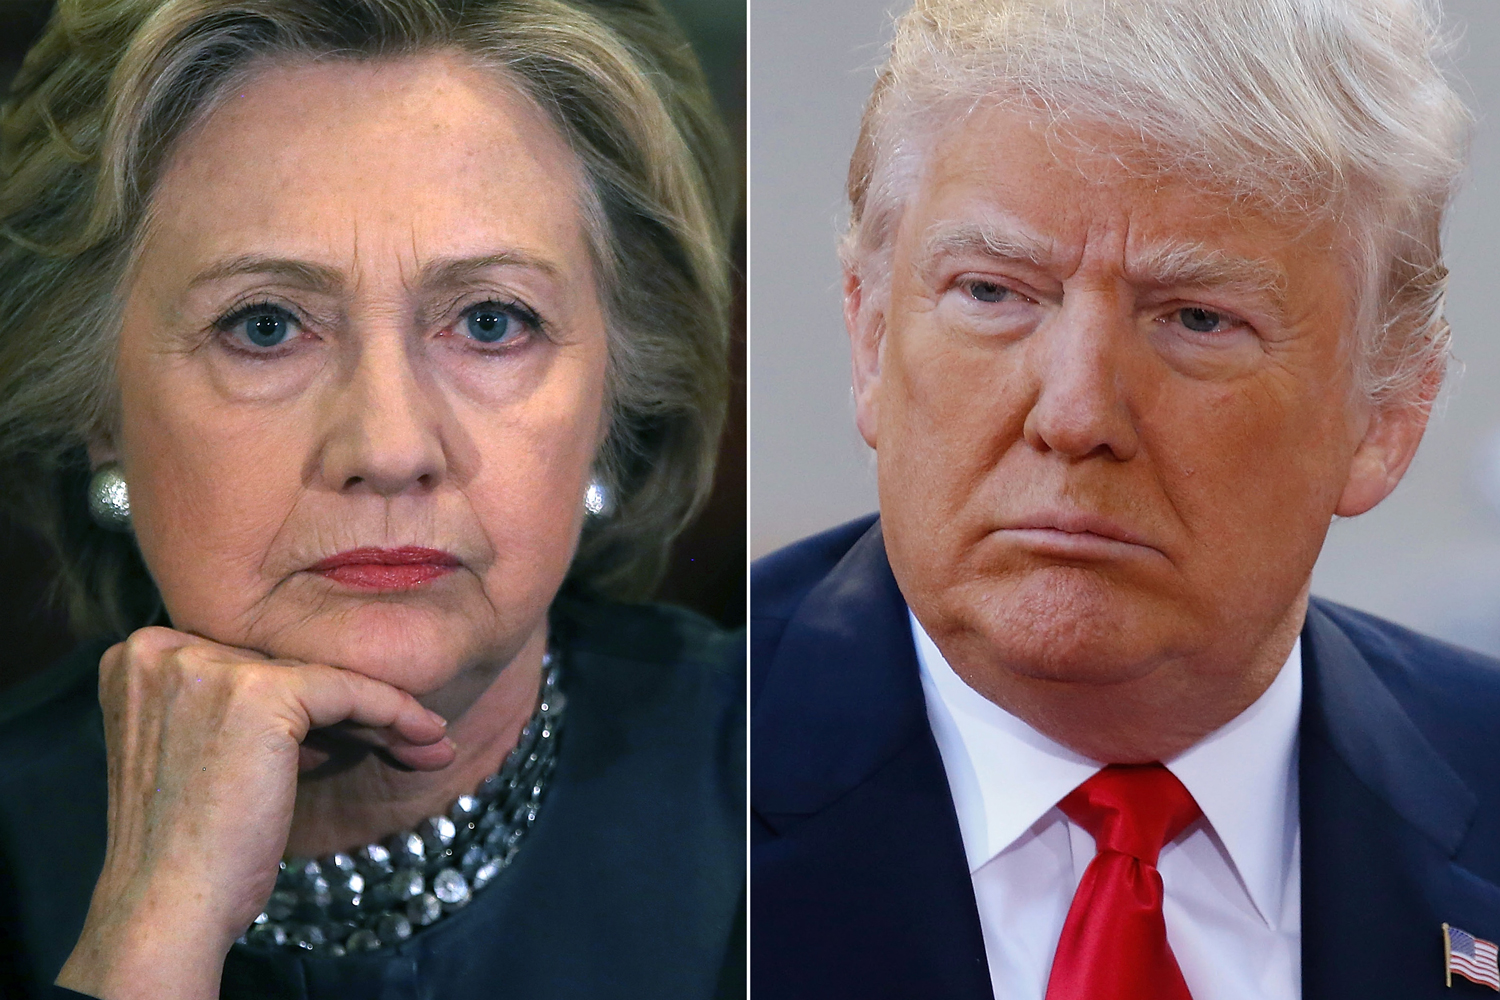 Hillary Clinton in New Haven, Connecticut on April 23, 2016 (R); Donald Trump in New York City, on April 21, 2016. (Justin Sullivan—Getty Images (R); John Lamparski—Getty Images)